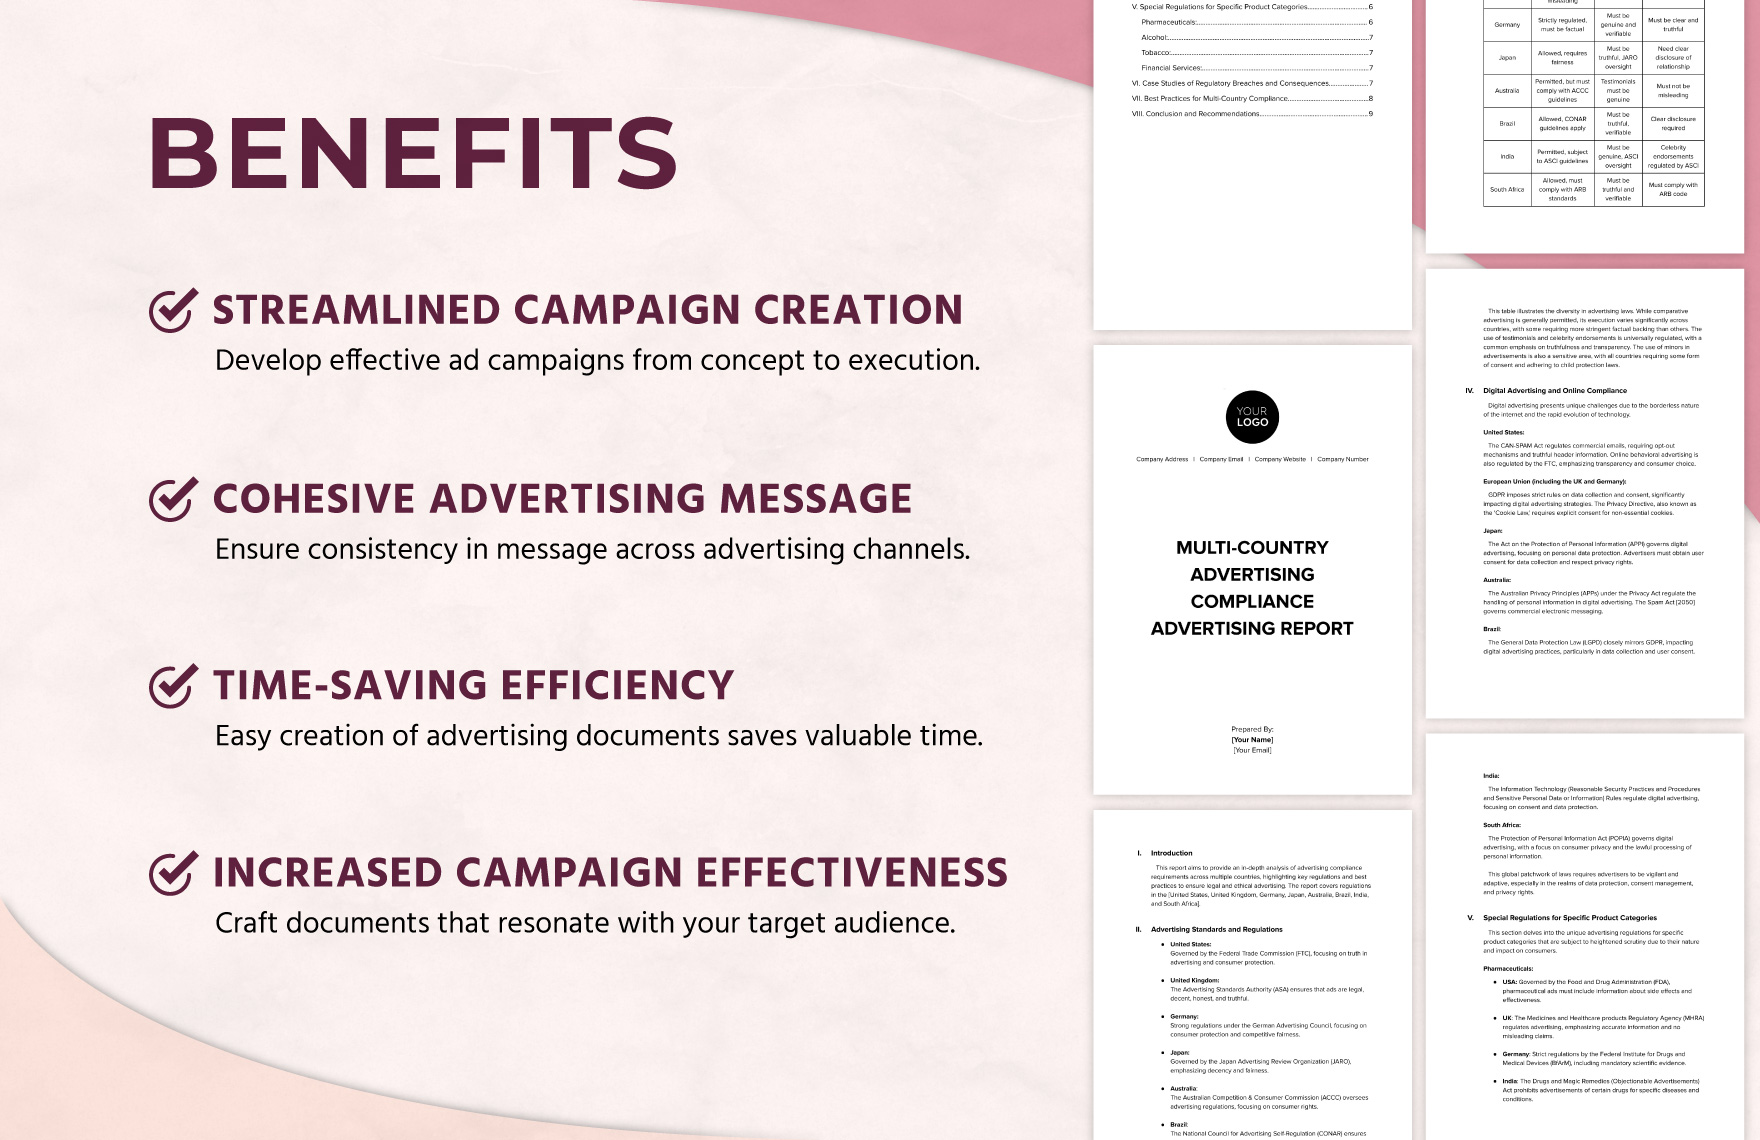 MultiCountry Advertising Compliance Advertising Report Template